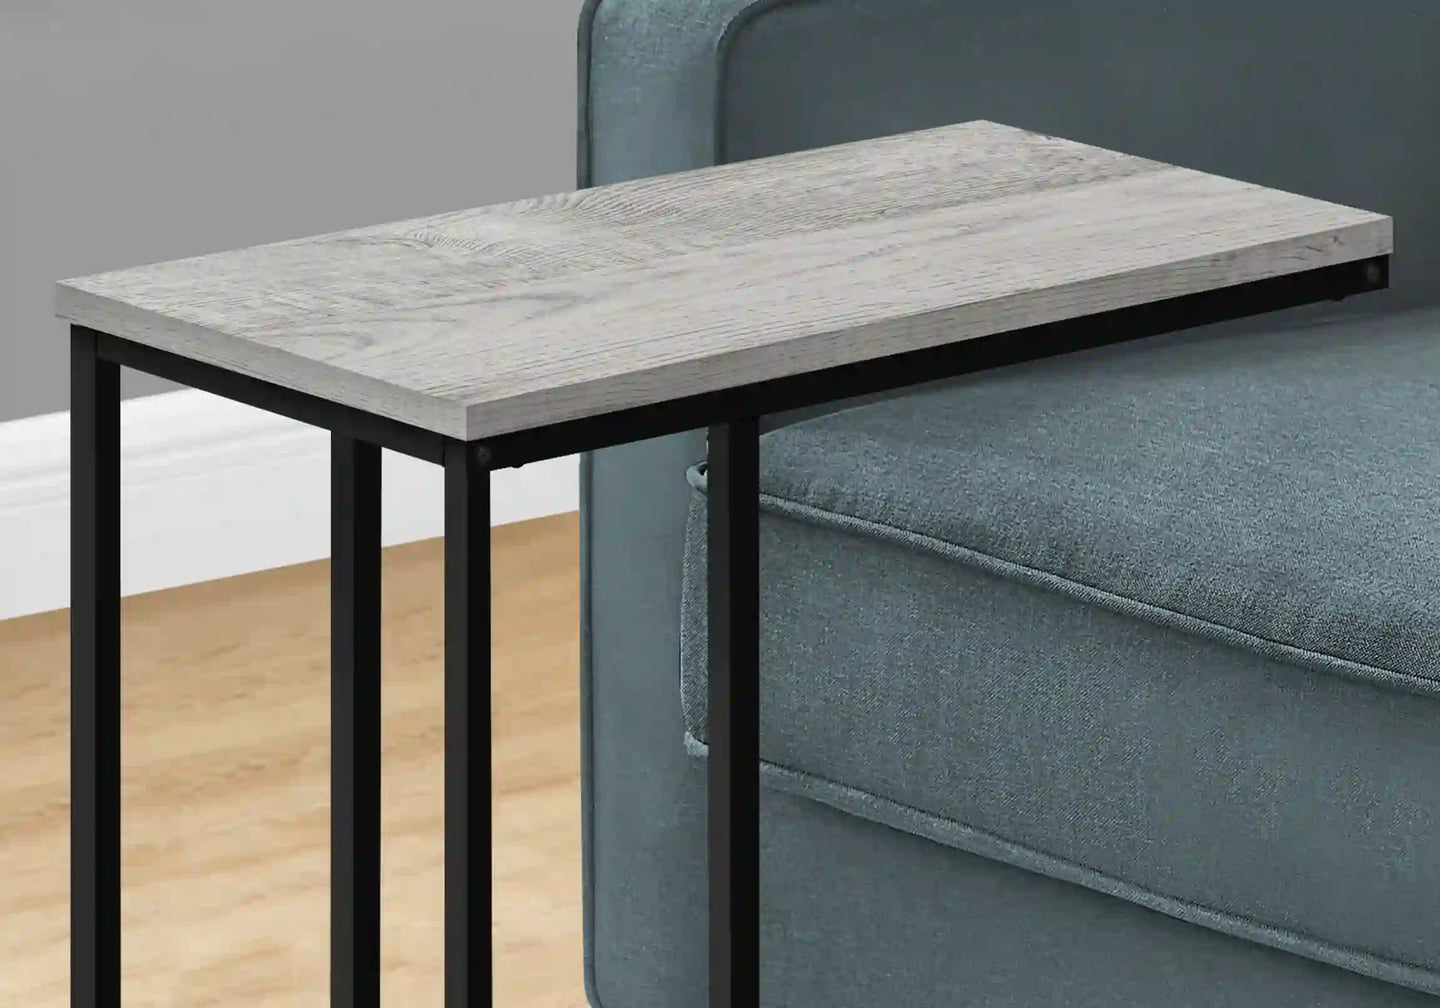 Grey Accent Table / C Table - I 3762